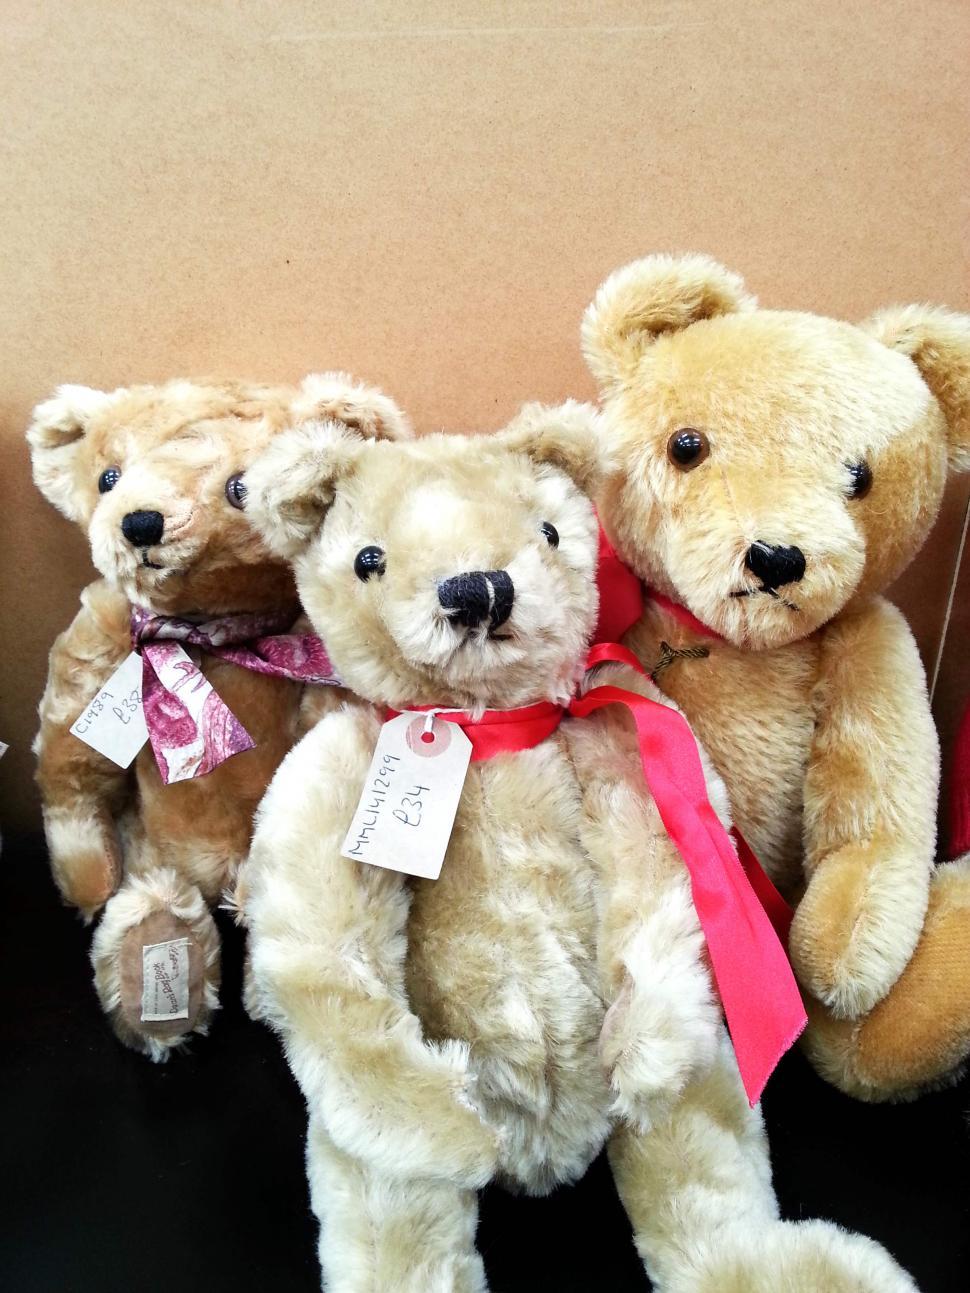 Free Image of Teddy Bears For Sale  